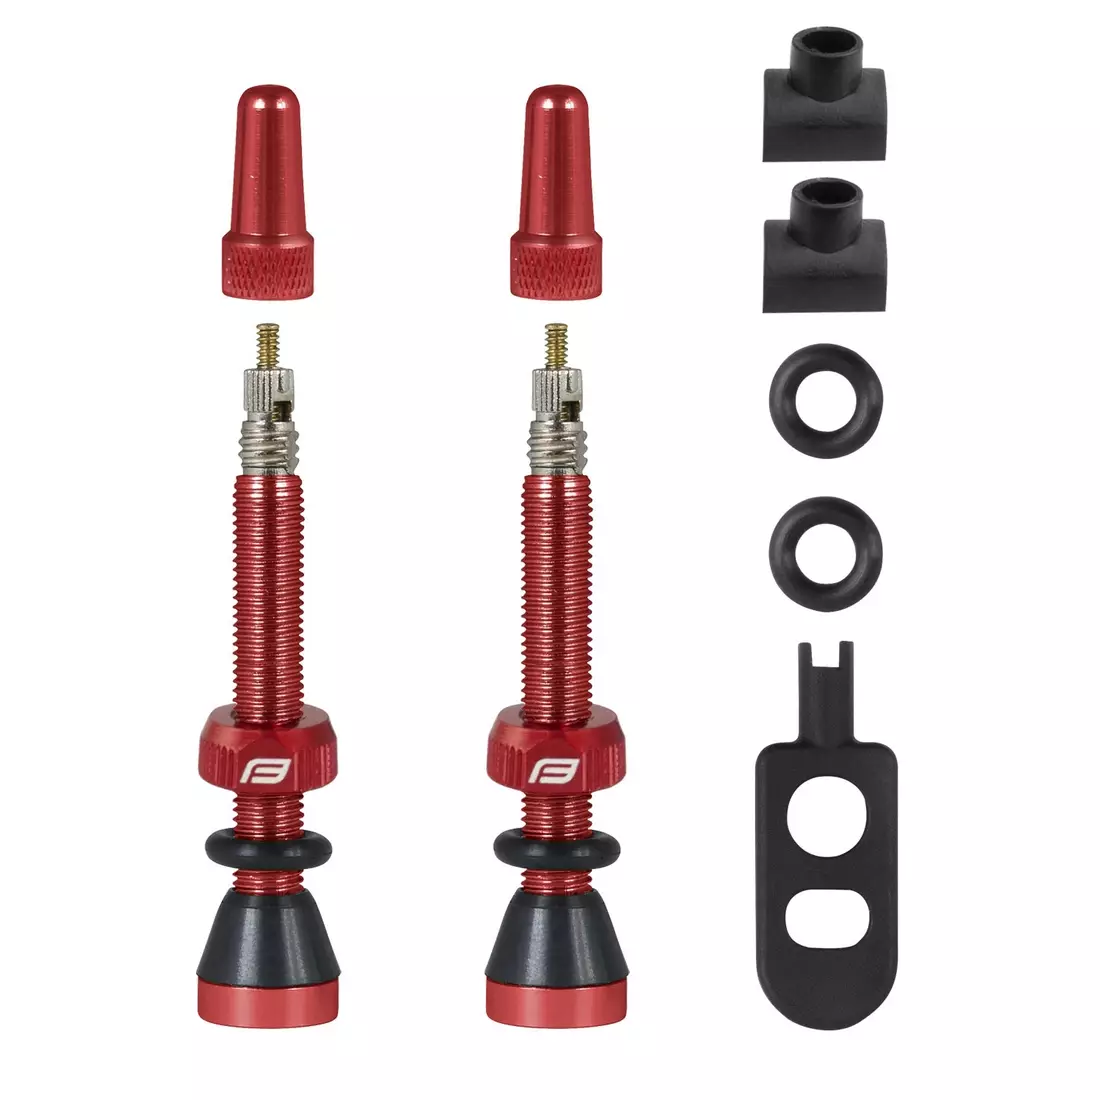 FORCE kit de supape tubeless FORCE 2xFV 44mm red 750443